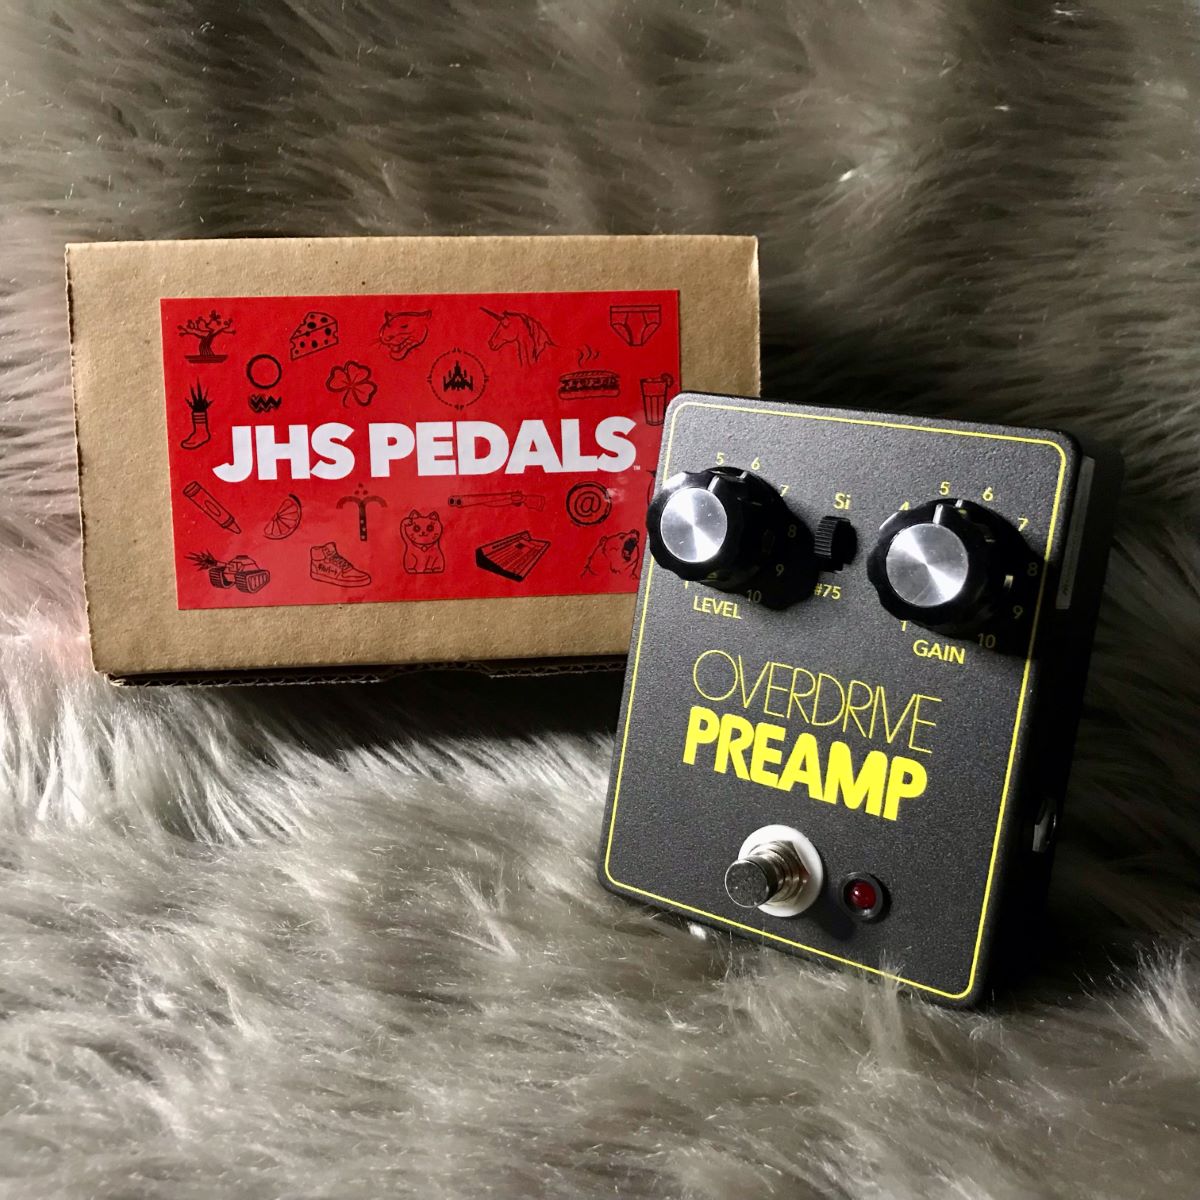 JHS Pedals OVERDRIVE PREAMP エフェクター オーバードライブ ...